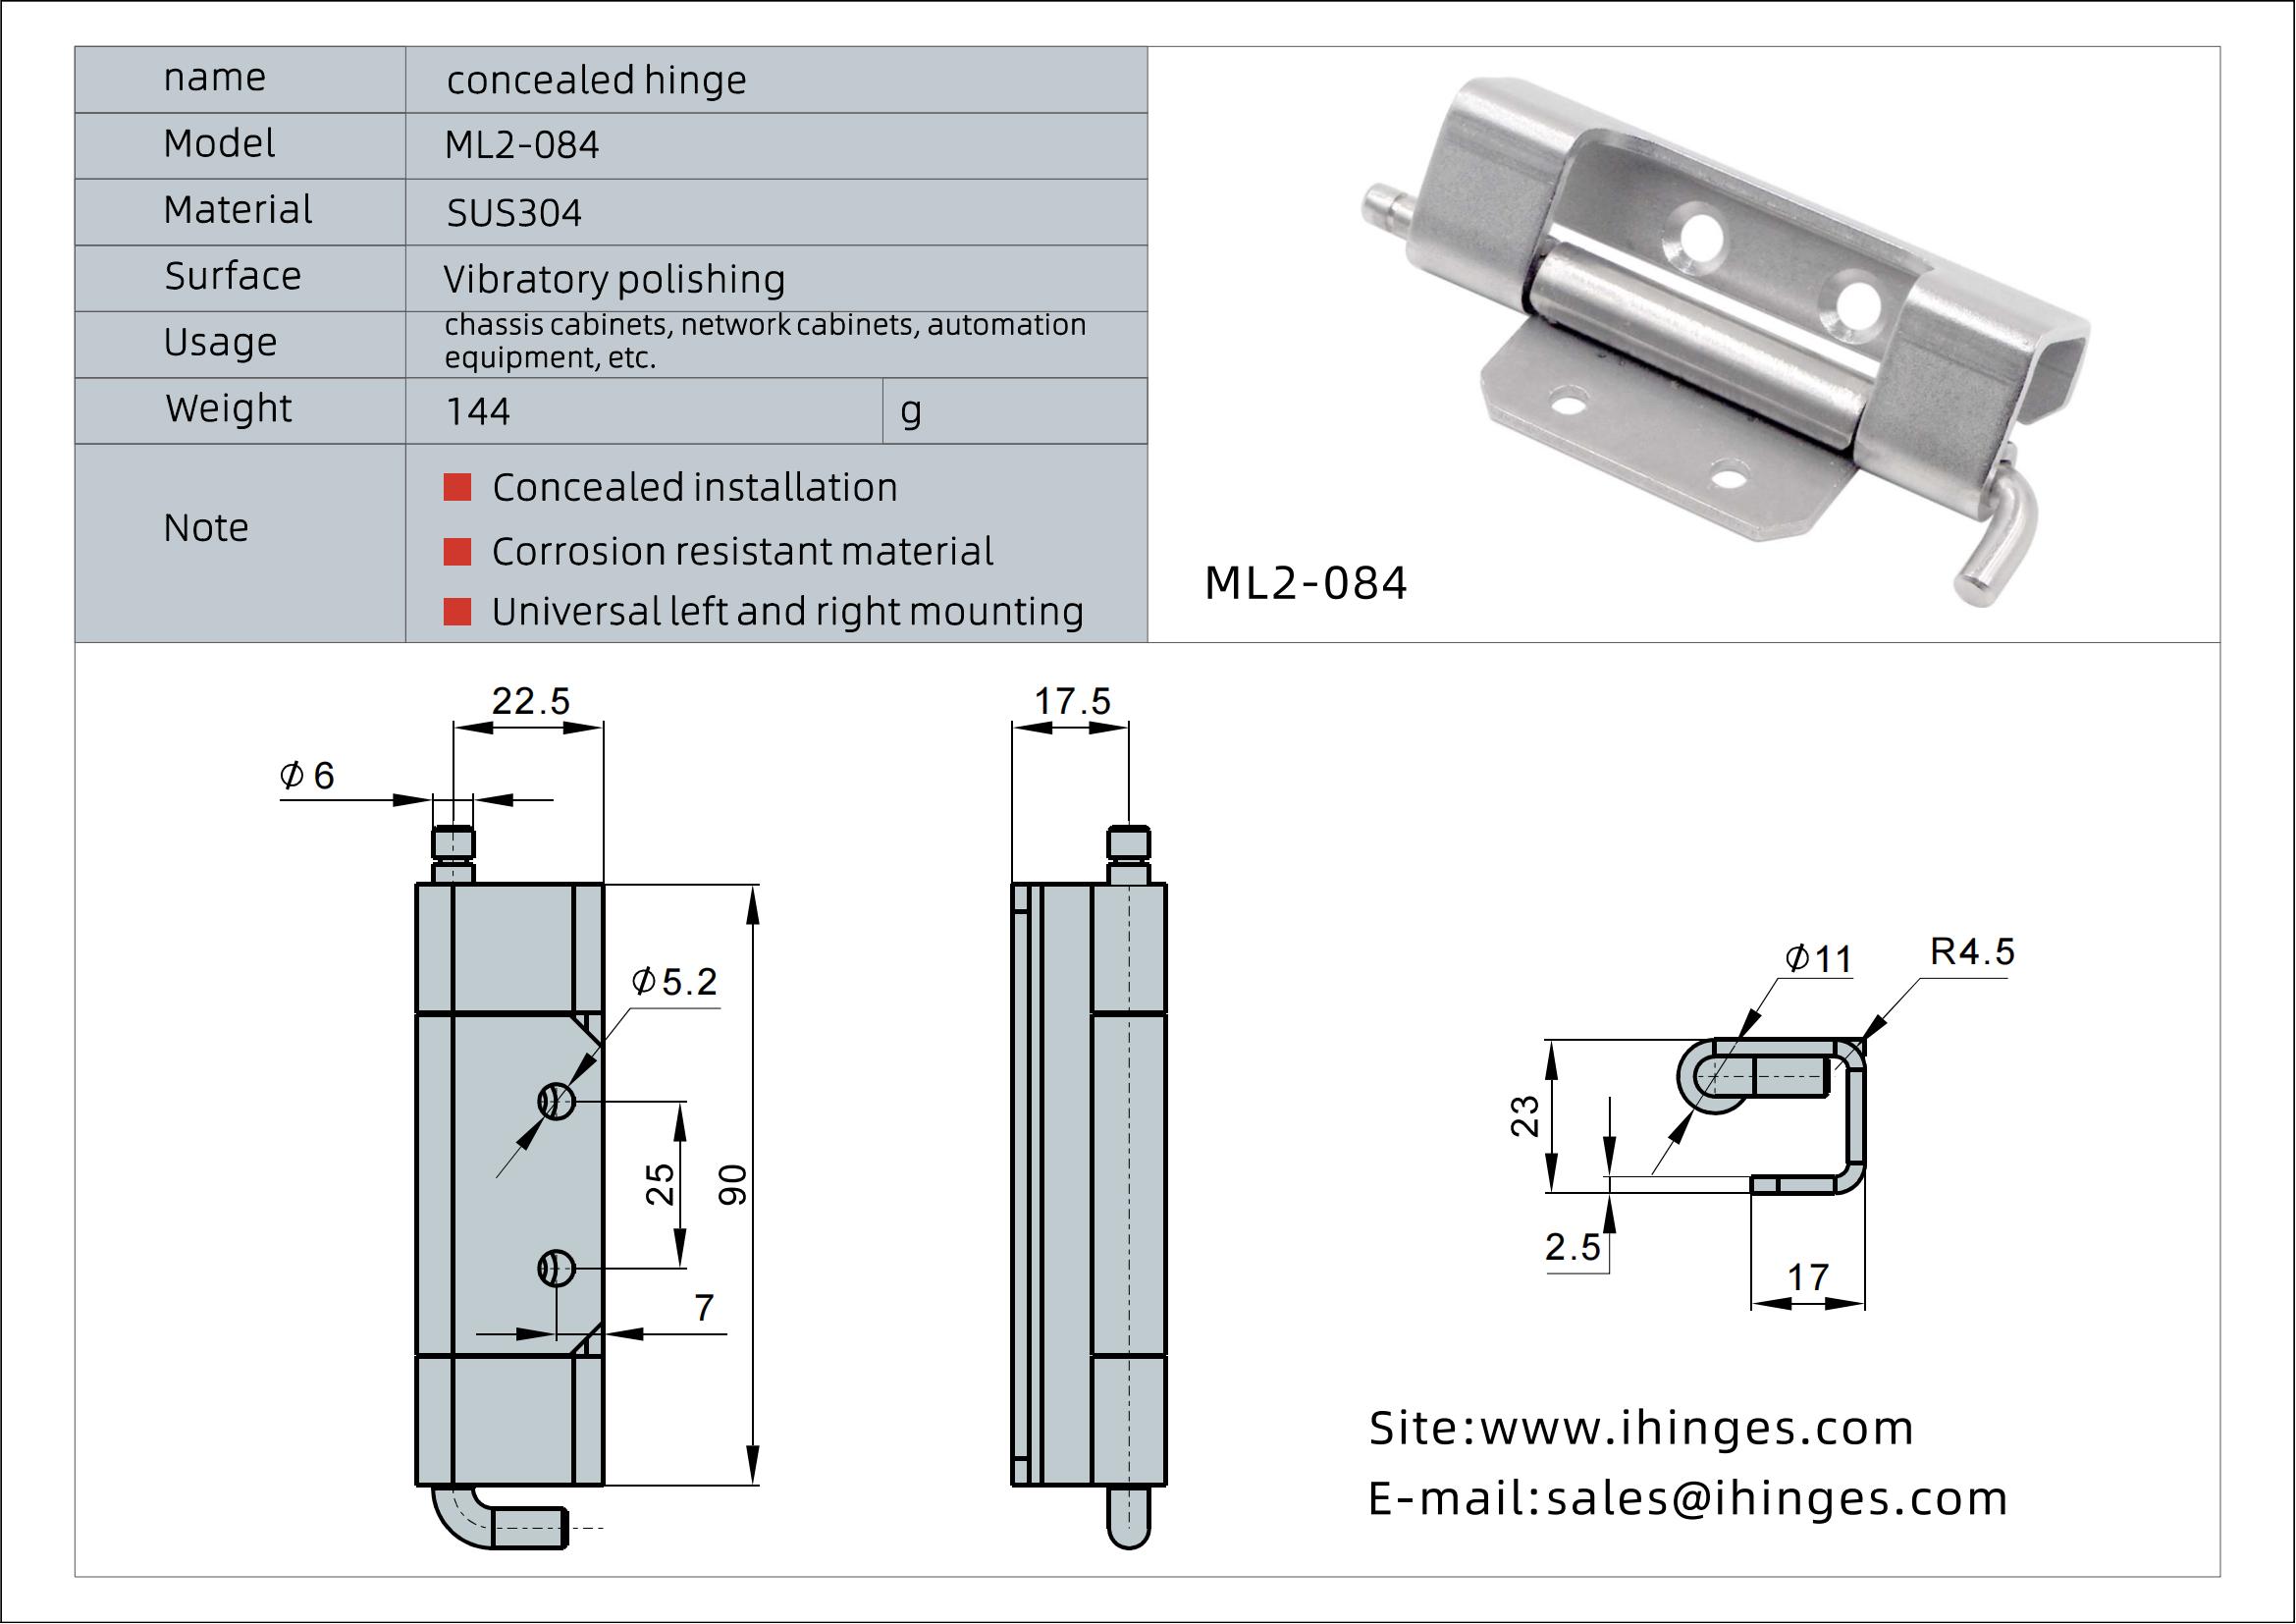 Concealed hinges for packaging machines